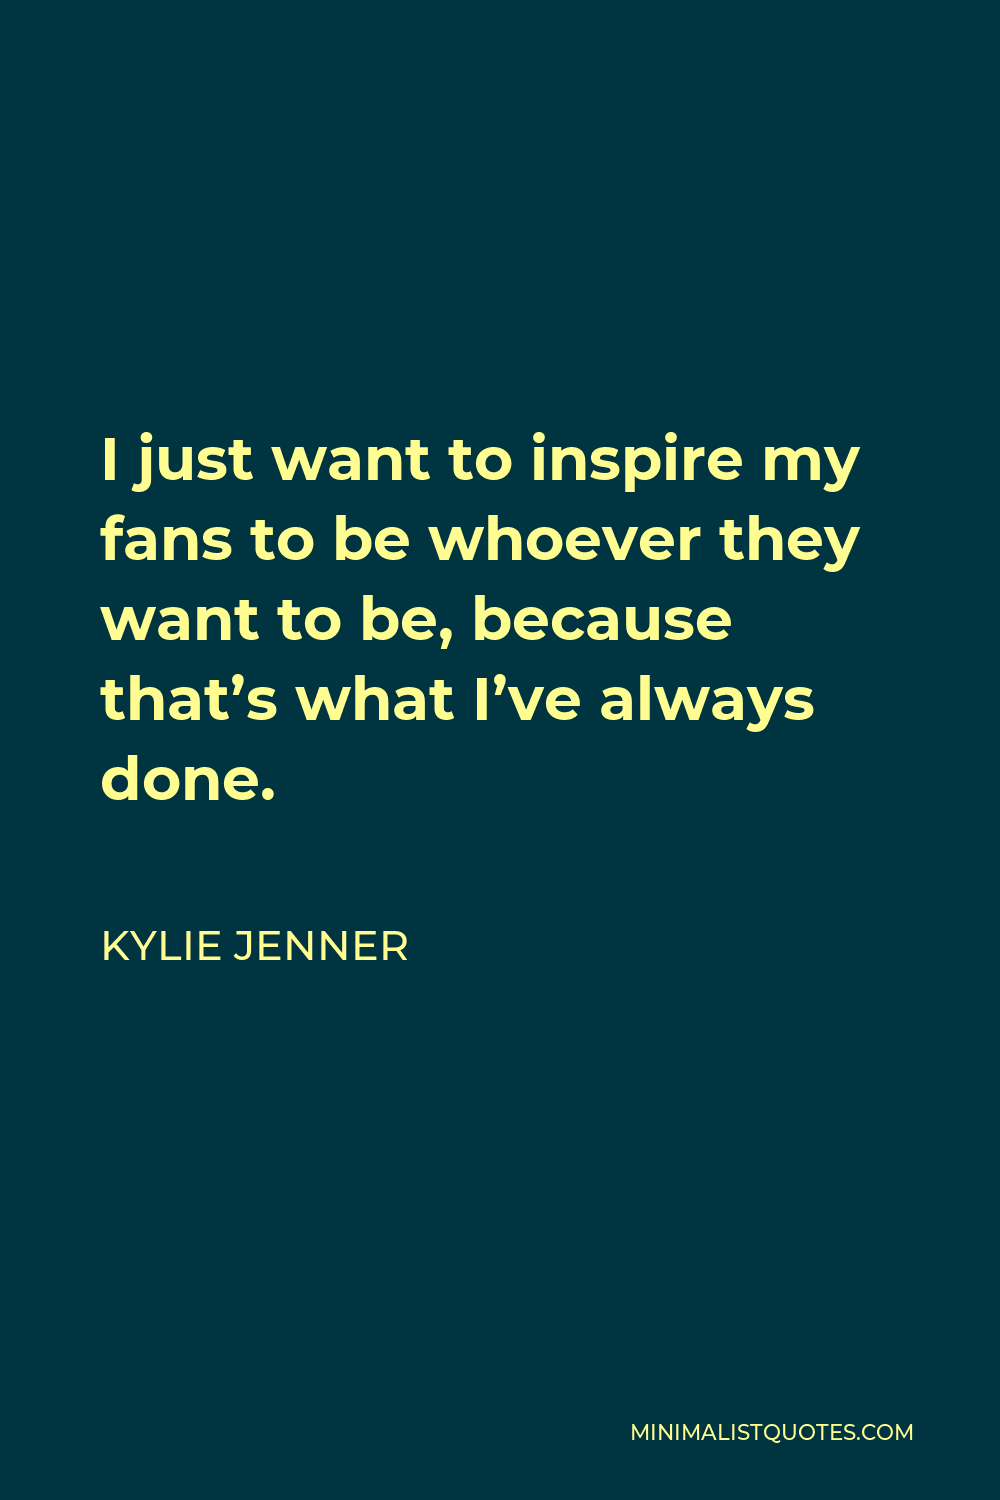 Kylie Jenner Quote - I just want to inspire my fans to be whoever they want to be, because that’s what I’ve always done.